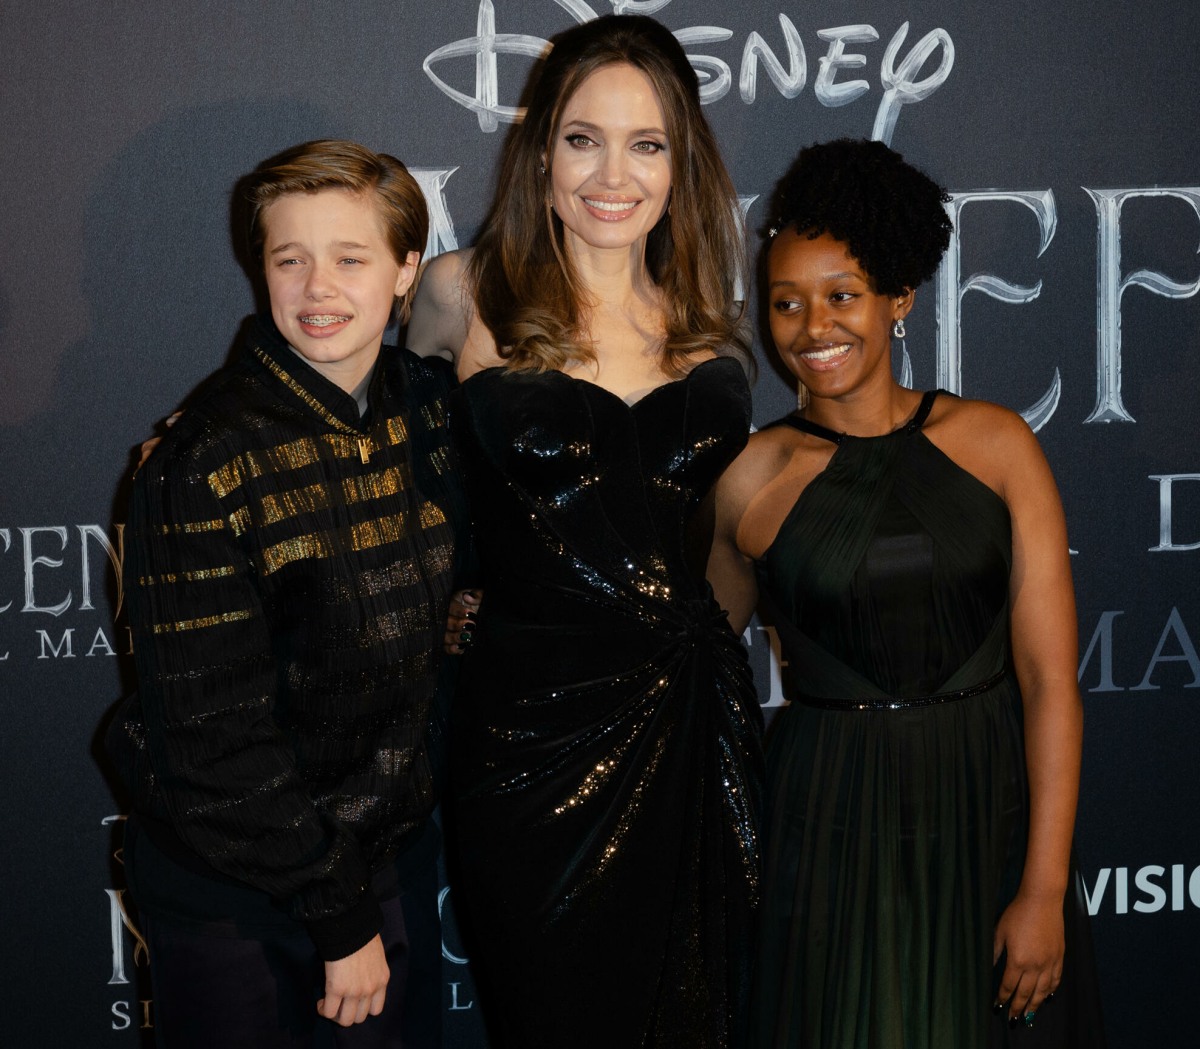 Italian Premiere of Disney's Maleficent held in Rome, Italy - Red Carpet